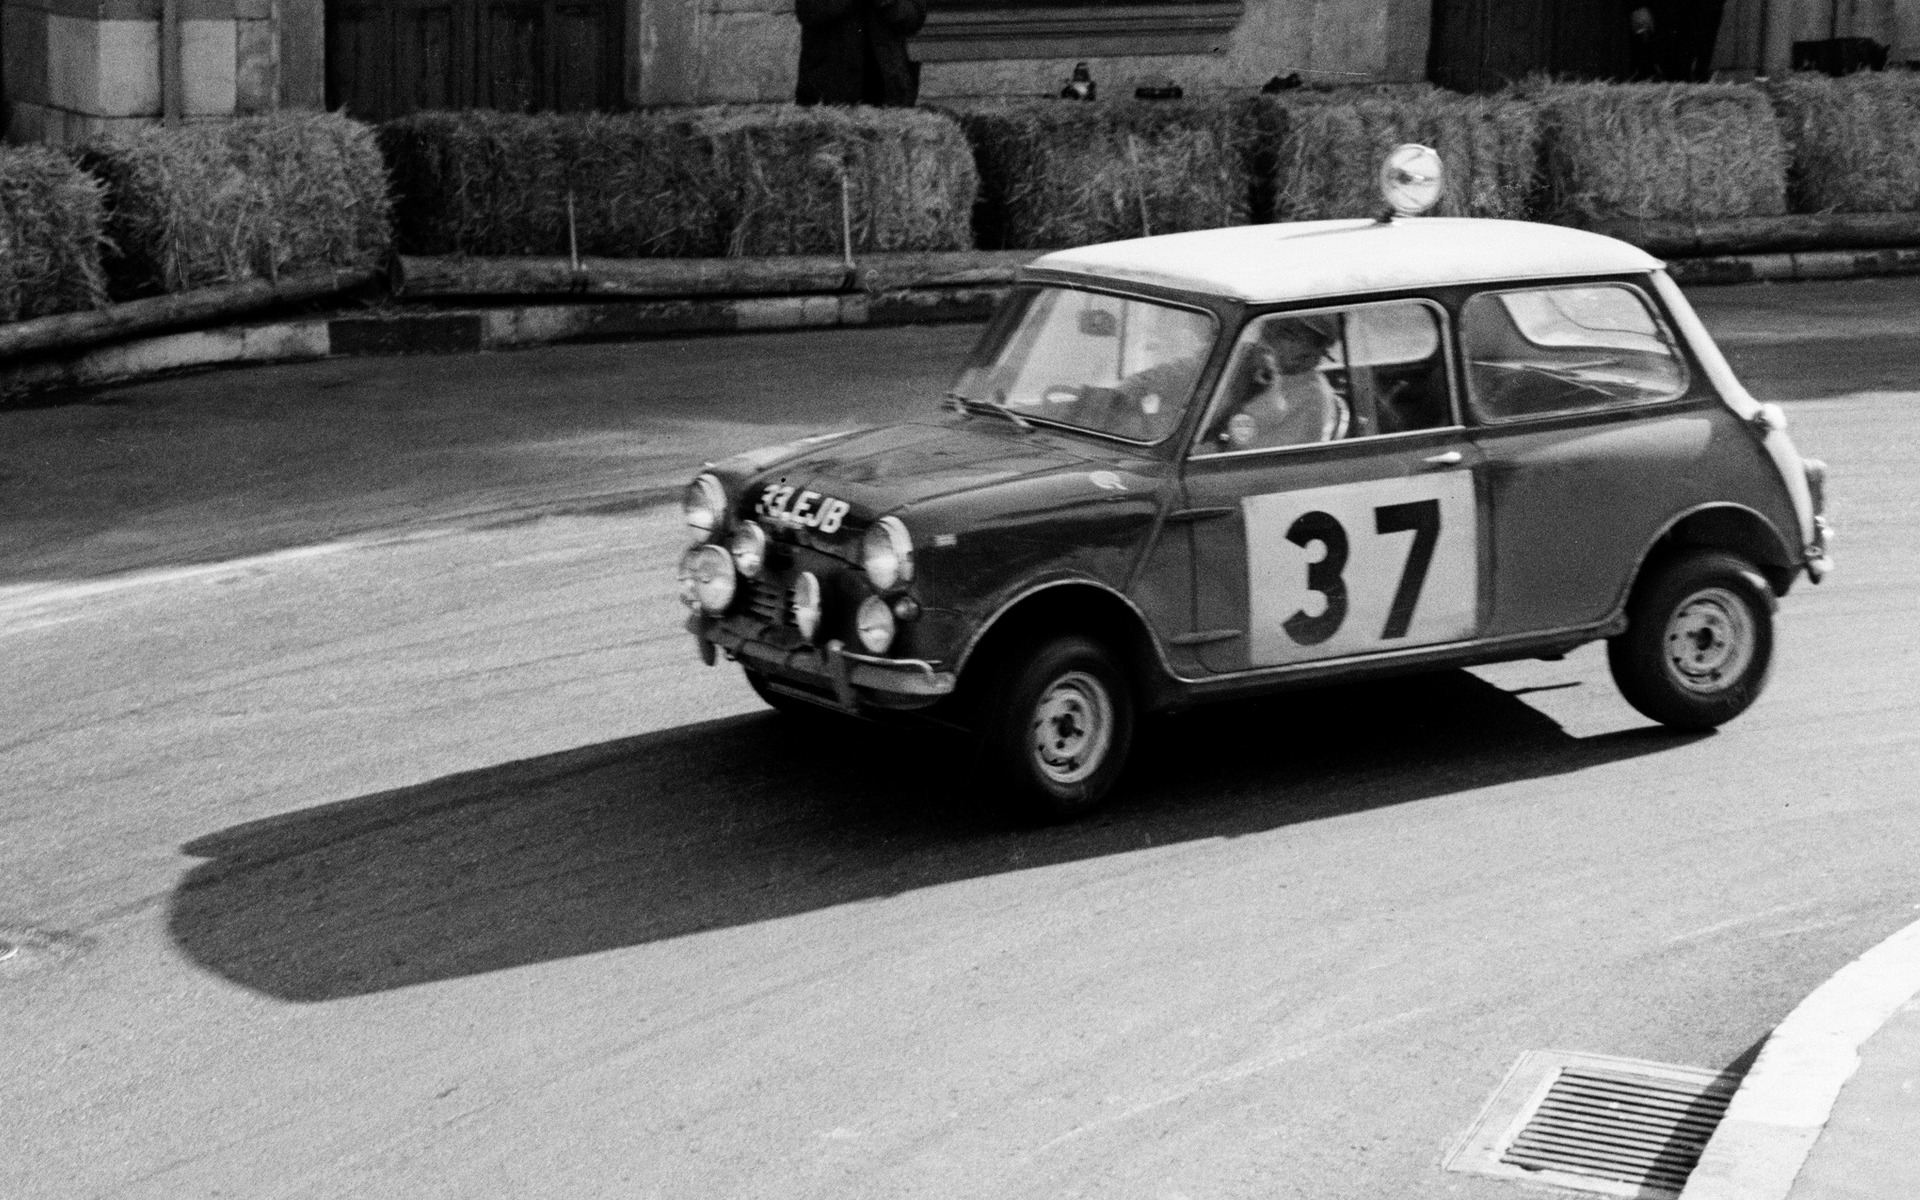 Paddy Hopkirk at the wheel of a Mini at the 1964 Monte Carlo Rallye.